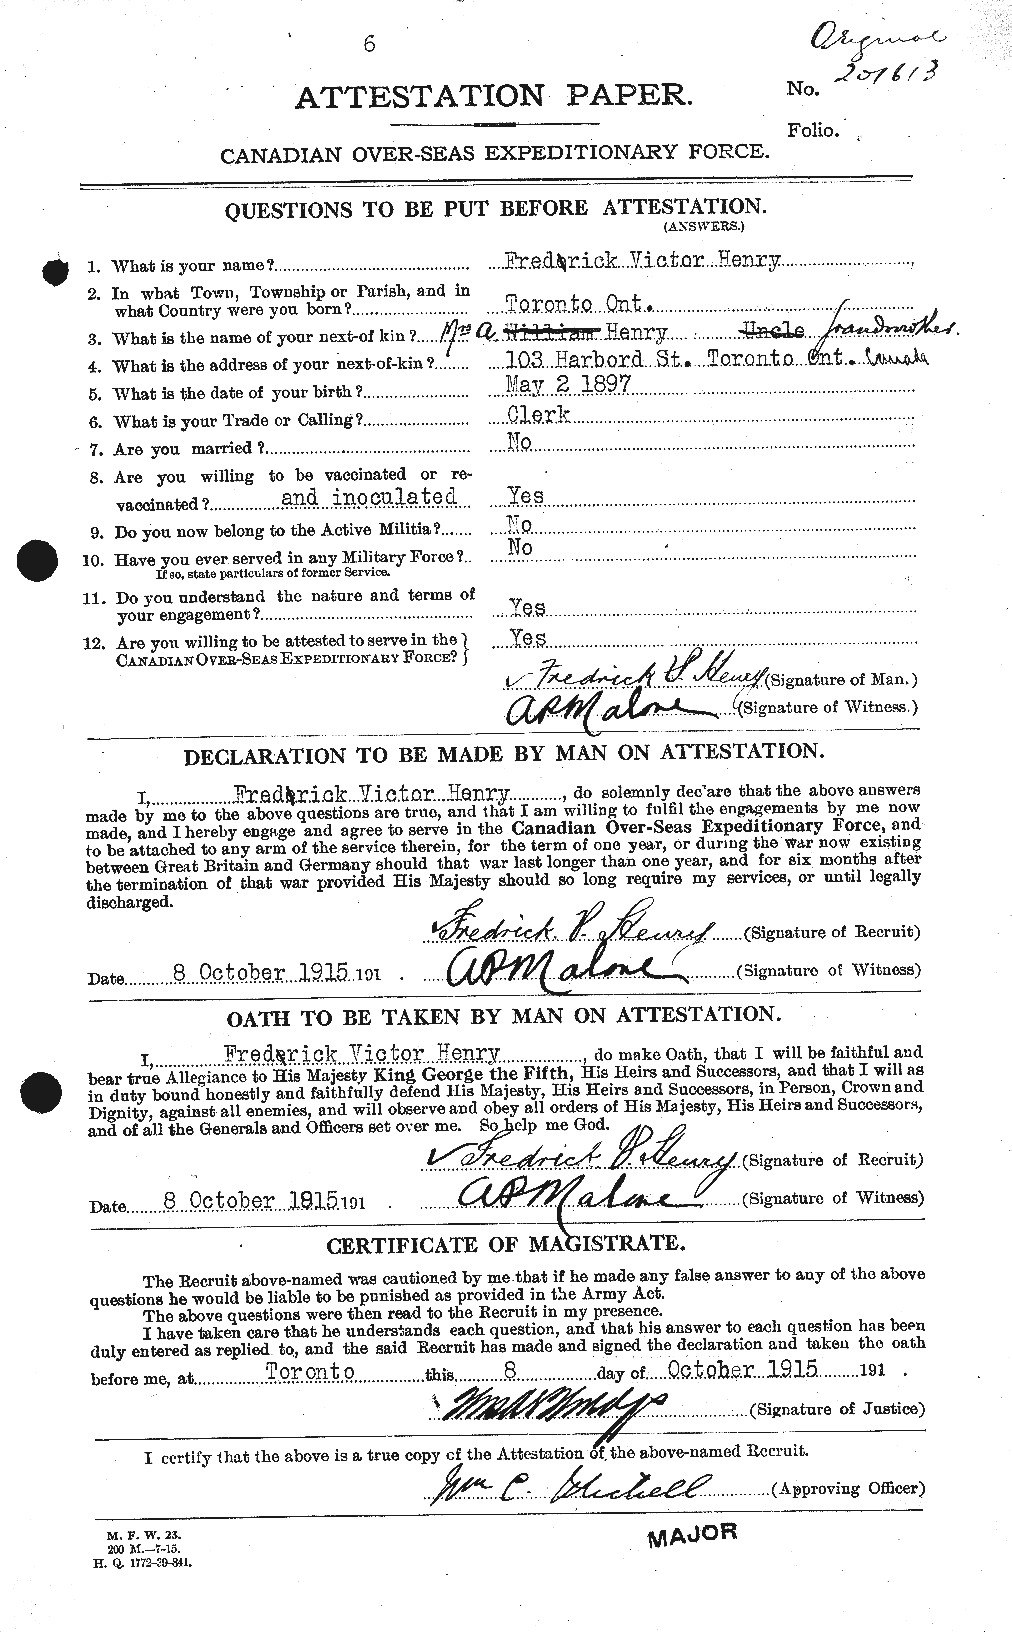 Personnel Records of the First World War - CEF 392861a